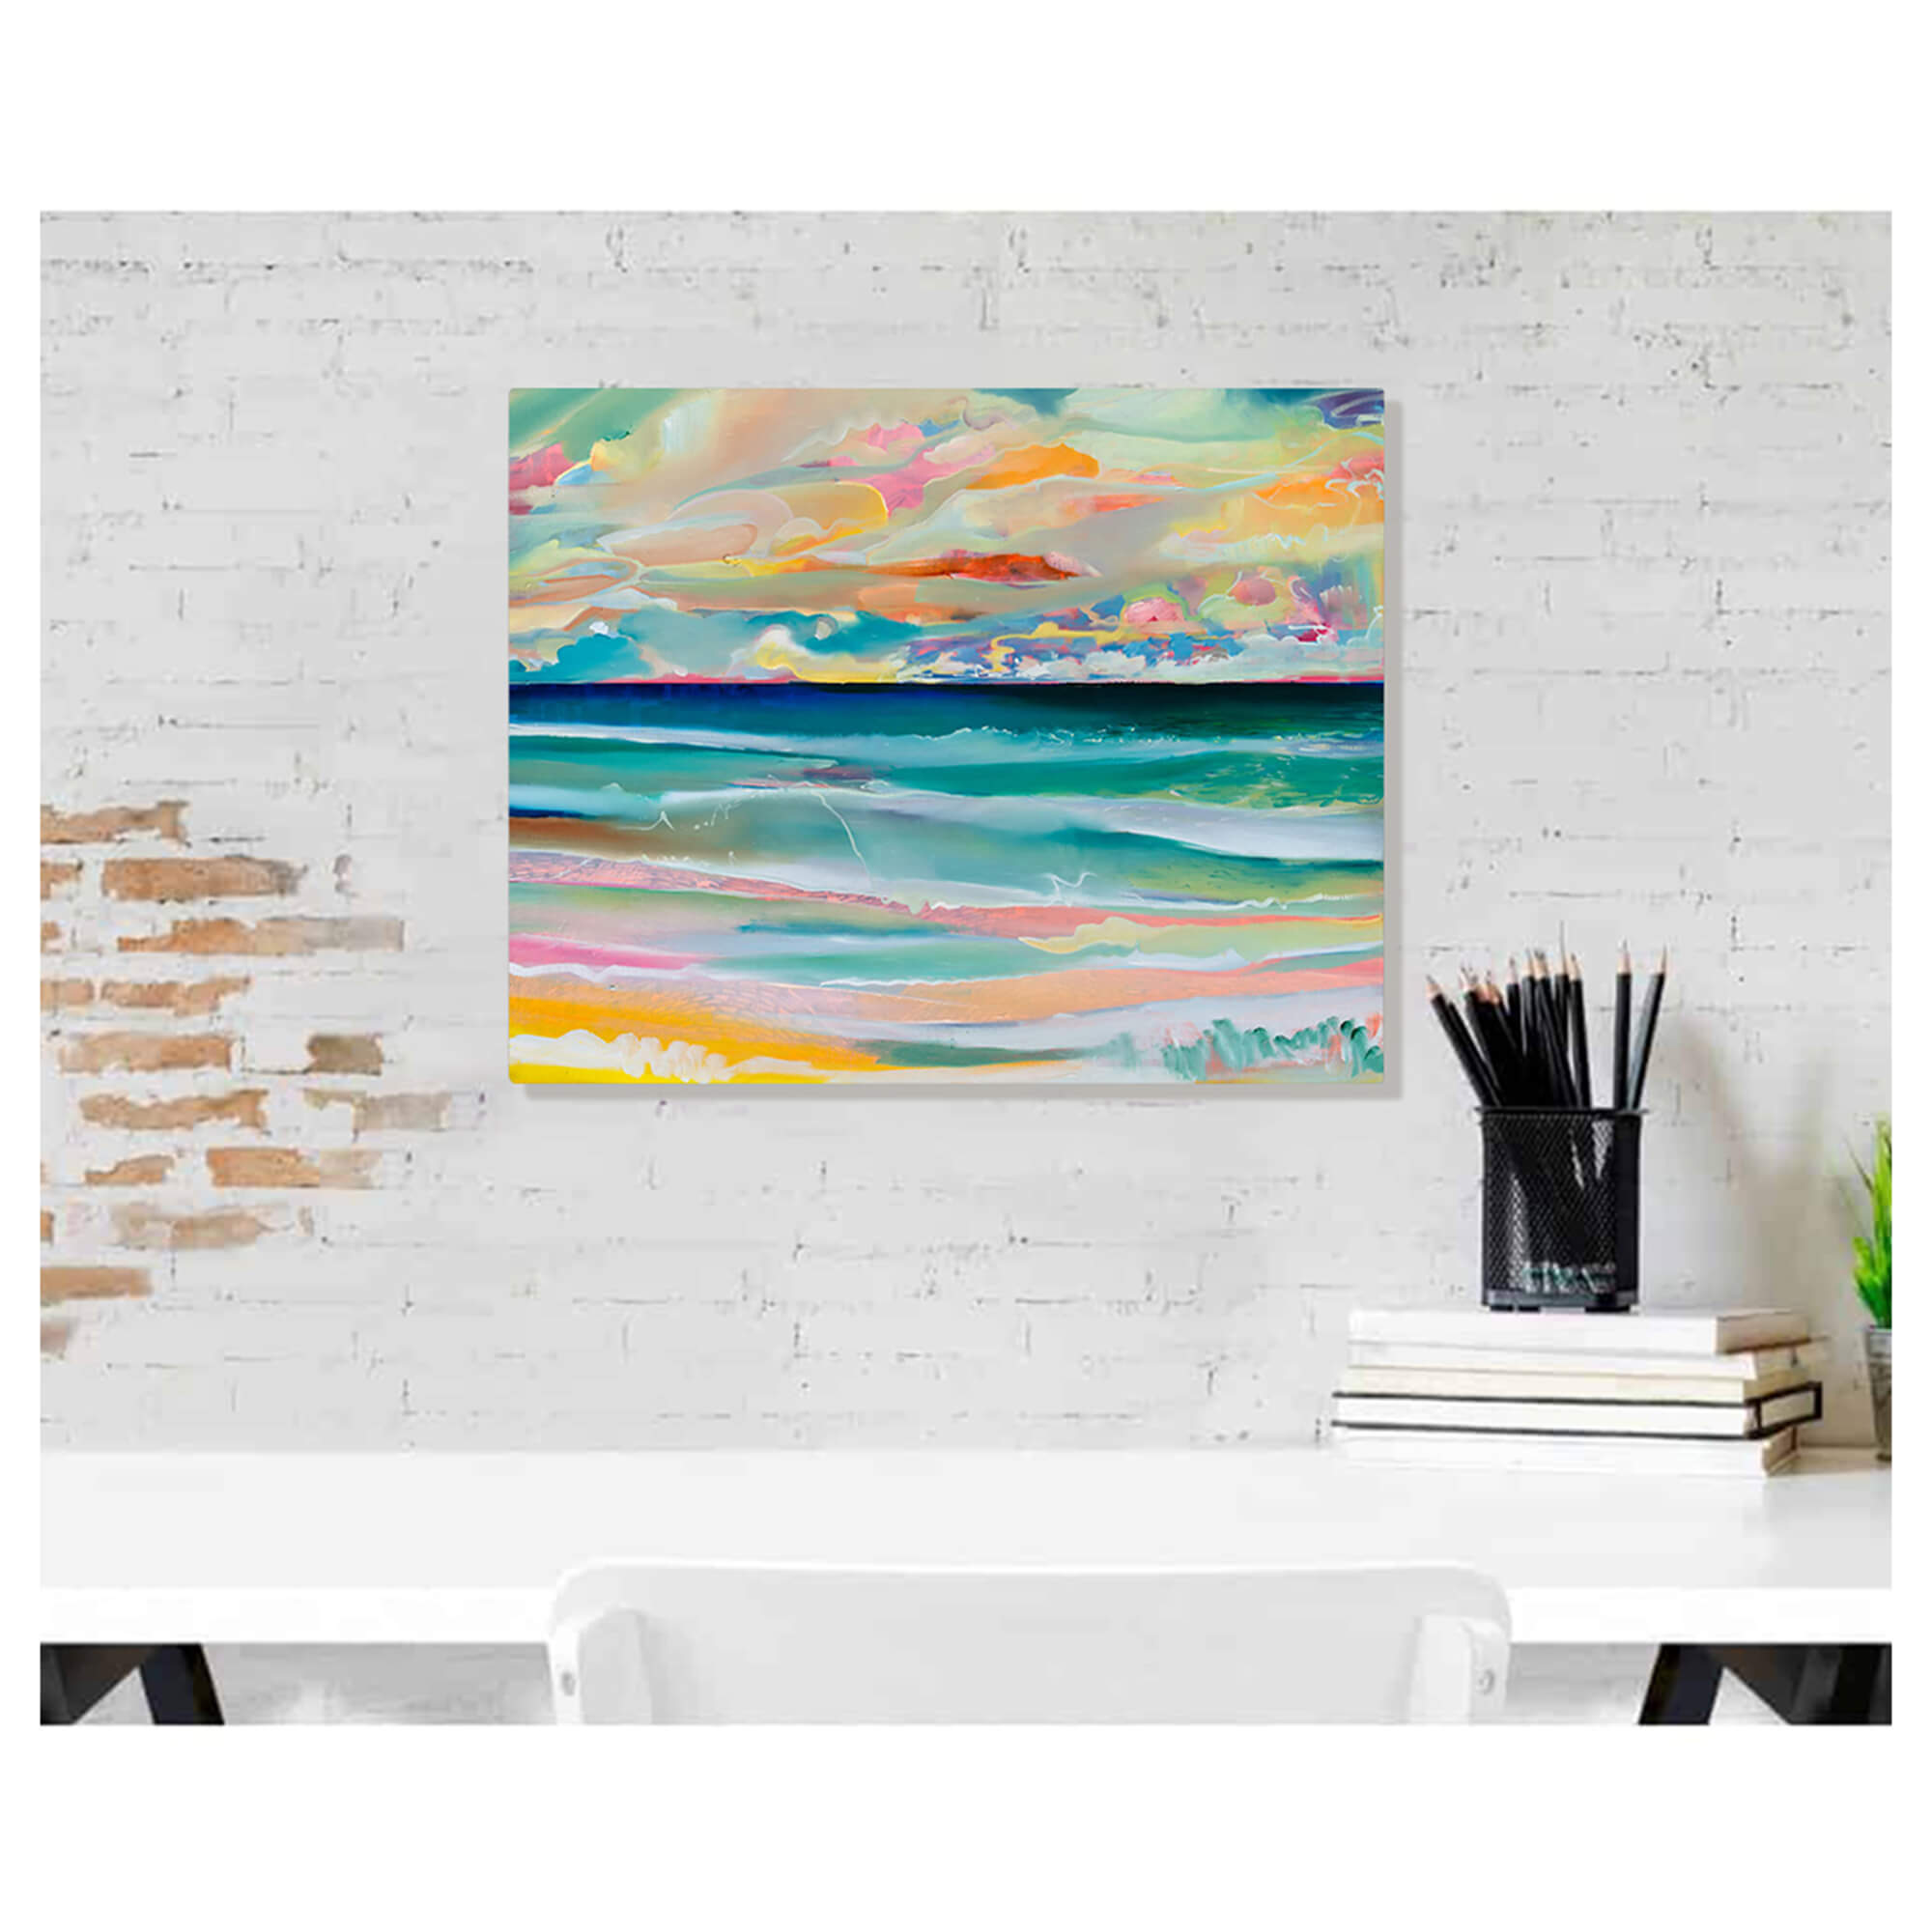 A metal art print of an abstract artwork of a seascape with pink, yellow and teal hues by Hawaii artist Saumolia Puapuaga